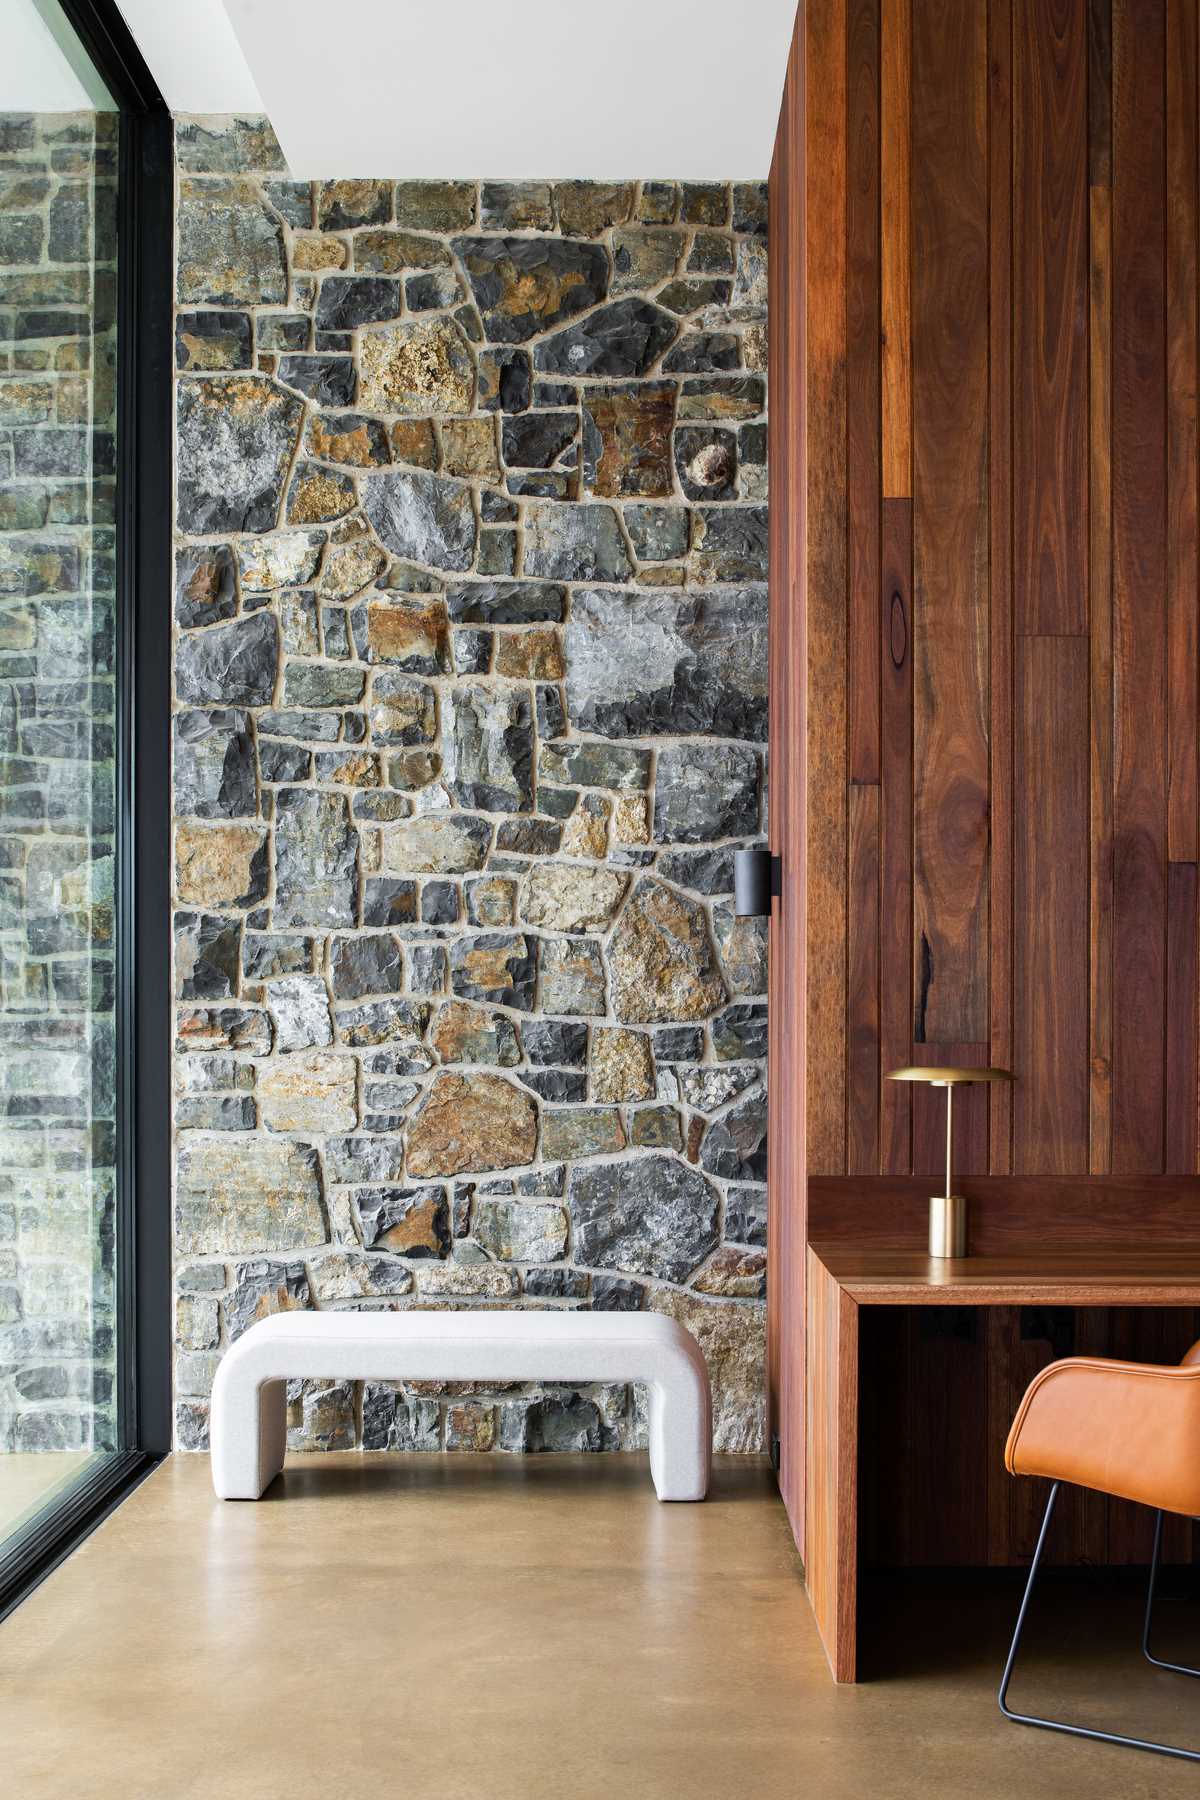 A modern home with stone walls, a seating area, and a built-in wood desk.